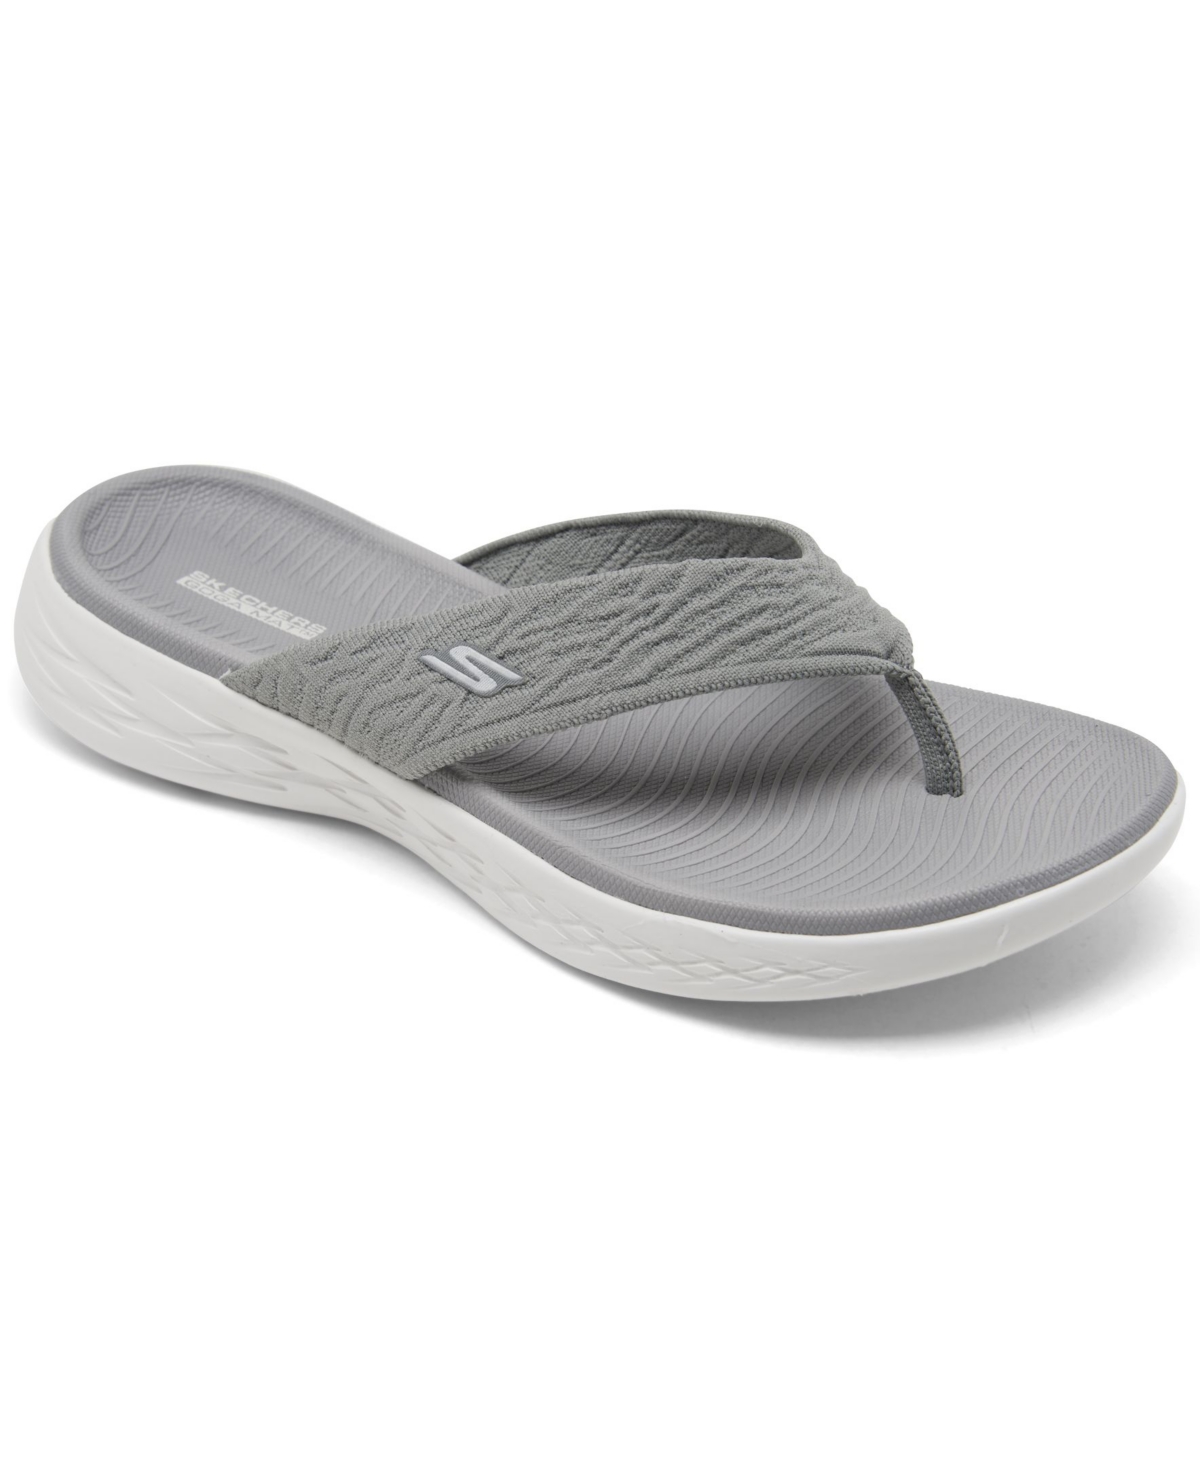 Women's On The Go 600 Sunny Athletic Flip Flop Thong Sandals from Finish Line - Gray